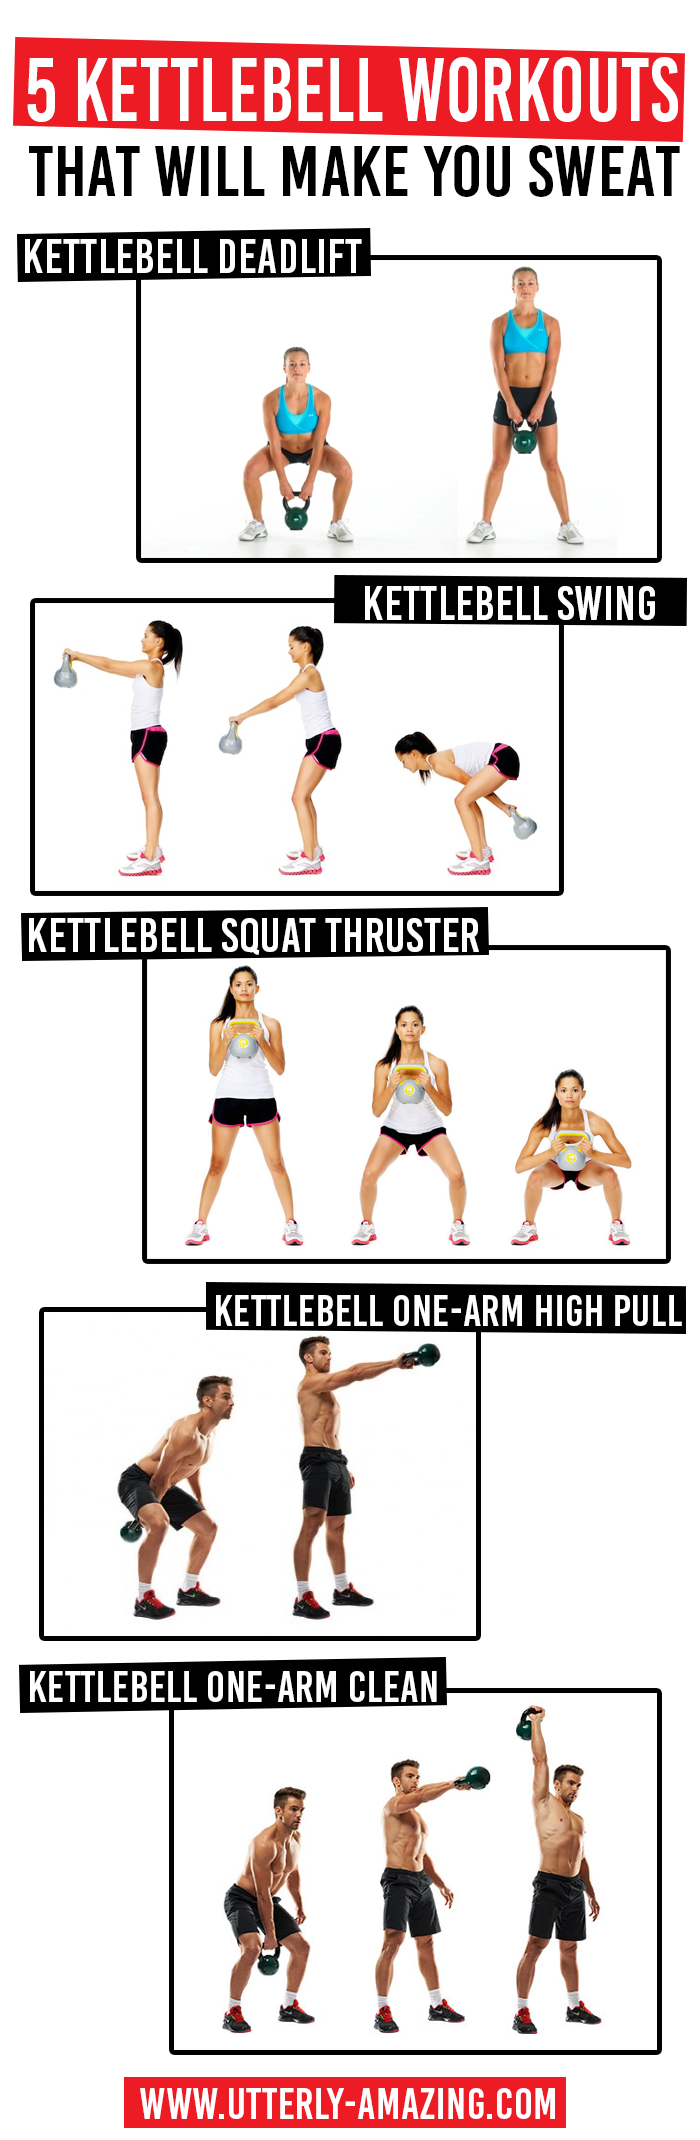 5 Kettlebell Workouts That Will Make You Sweat